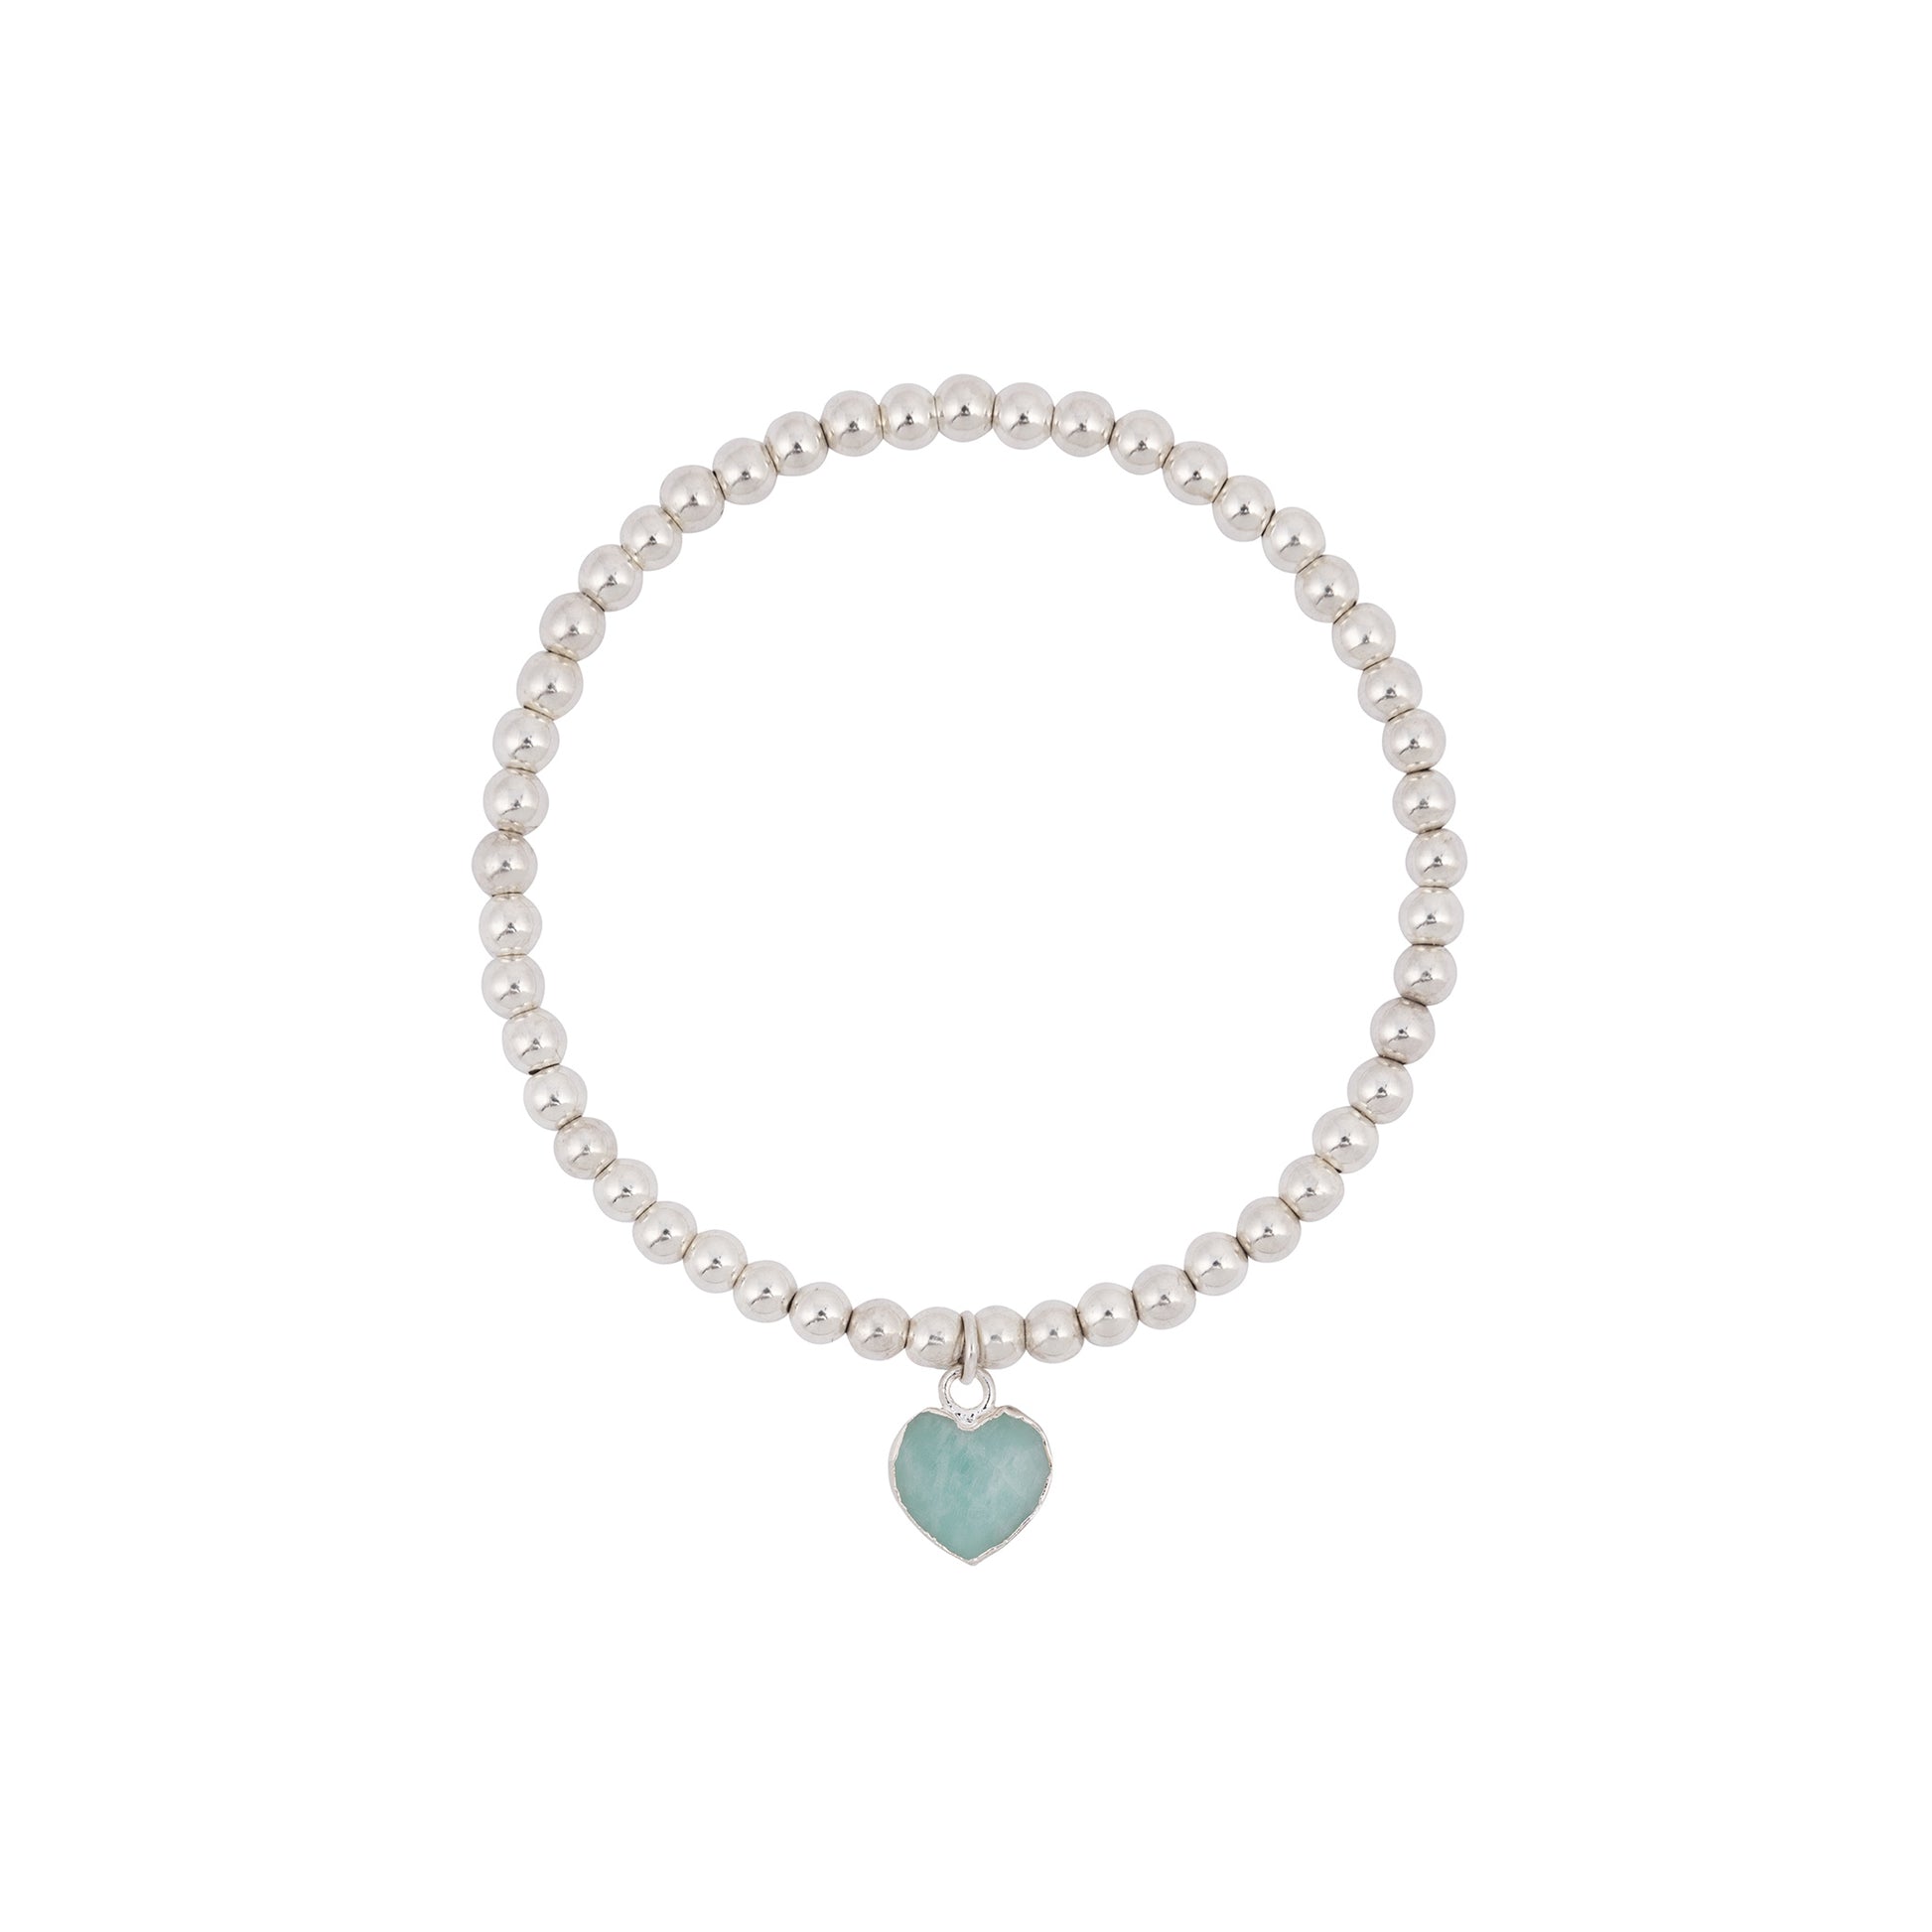 A Heart Charm Bracelet by Made Here with Love featuring a single heart-shaped Amazonite charm. The uniform beads form a continuous loop, with the charm elegantly centered at the bottom. The bracelet is beautifully displayed against a white background.